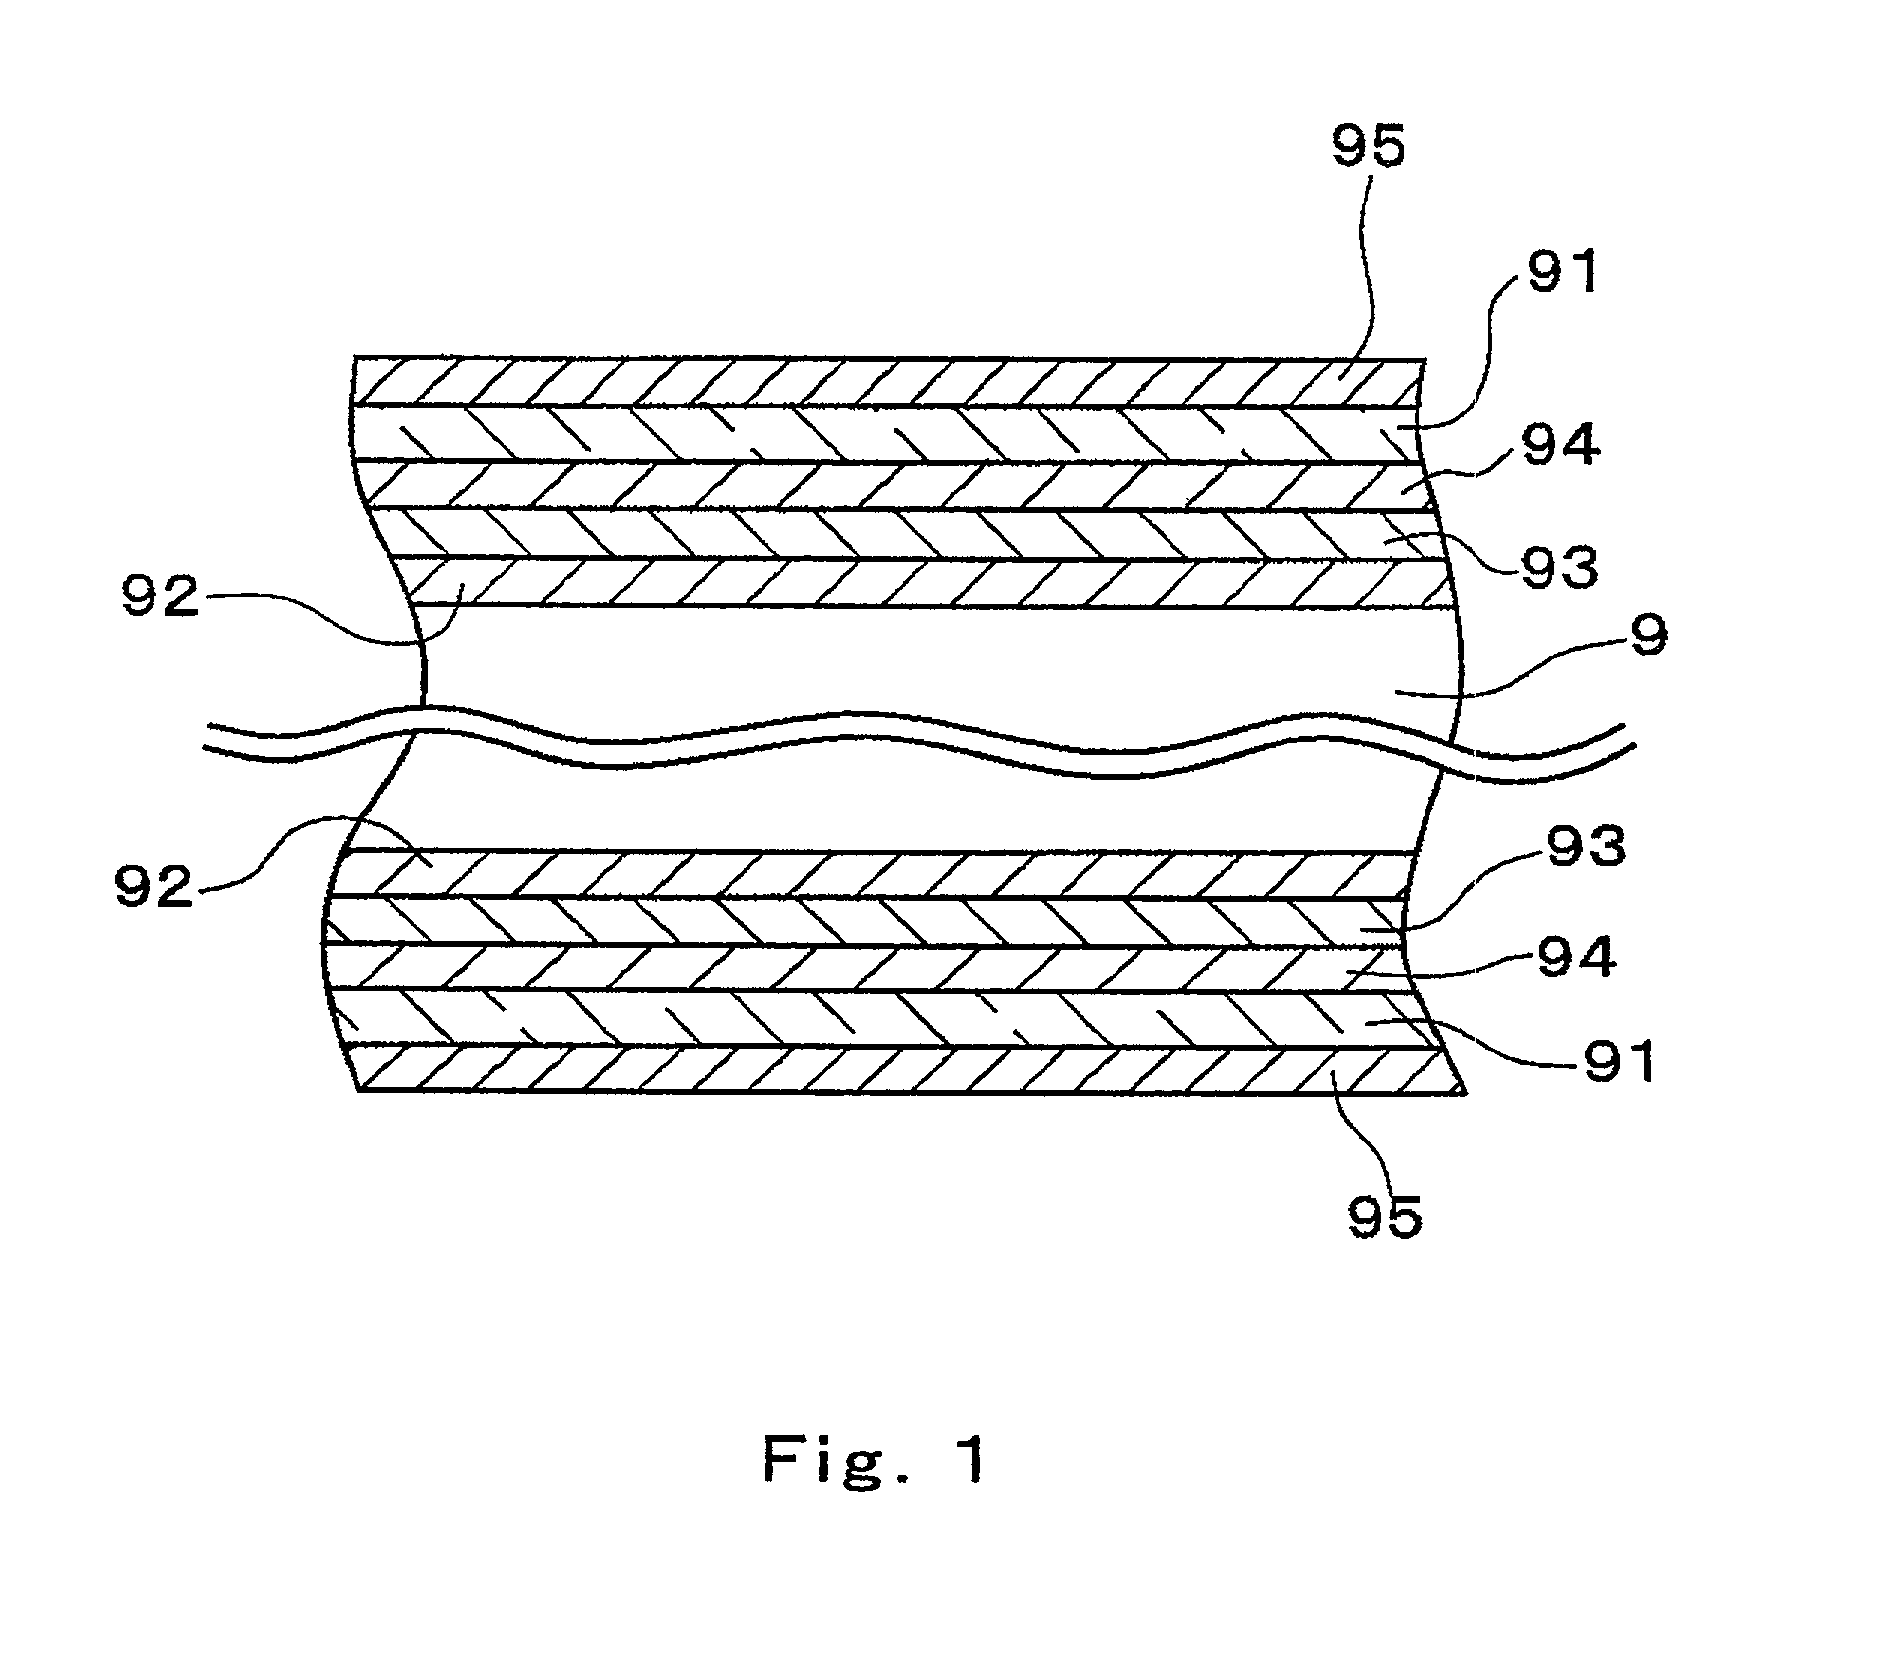 Magnetic recording disk, magnetic recording disk manufacturing method and magnetic recording disk manufacturing system